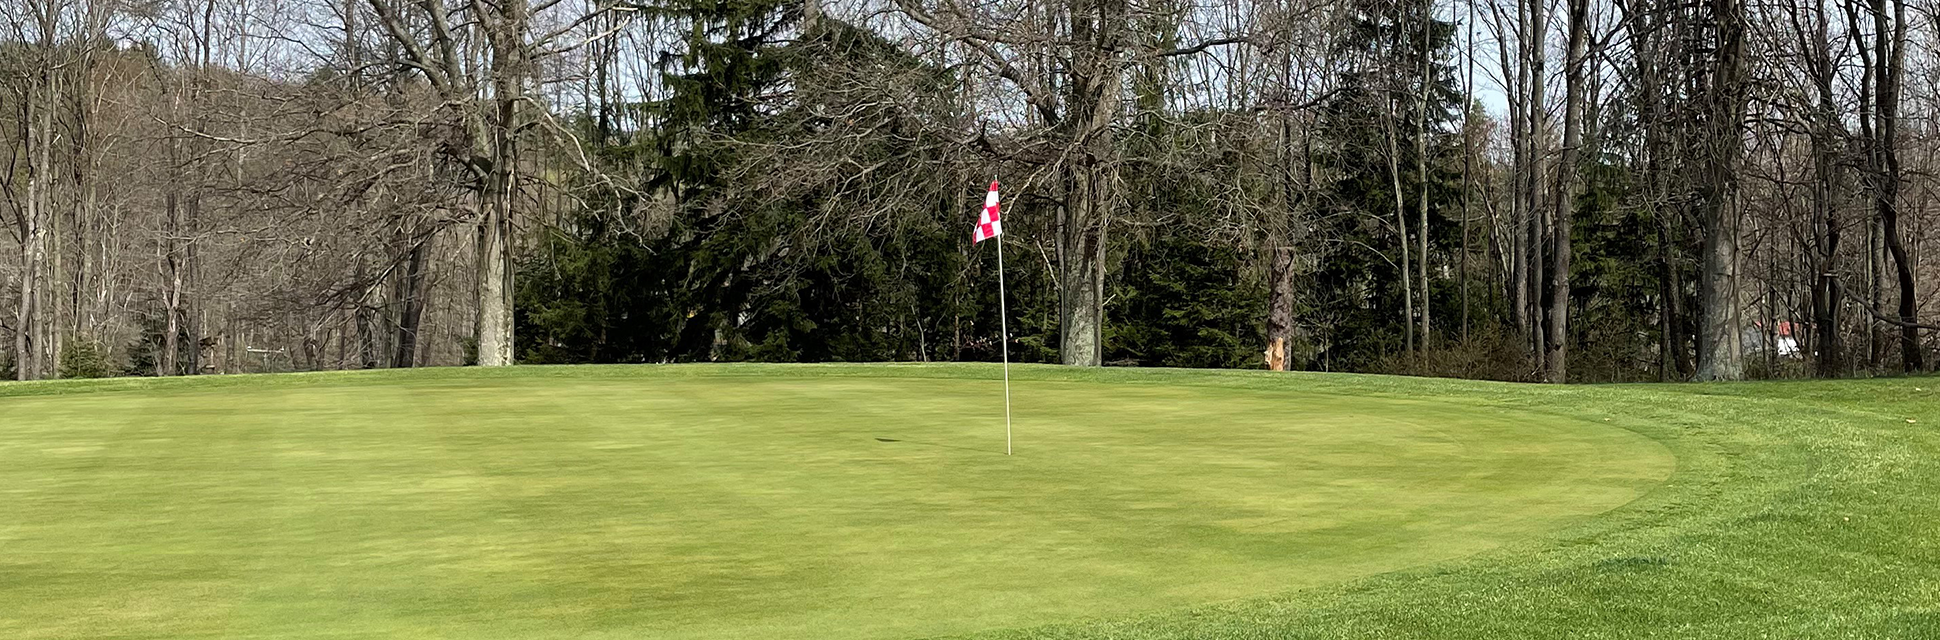 course green with flag